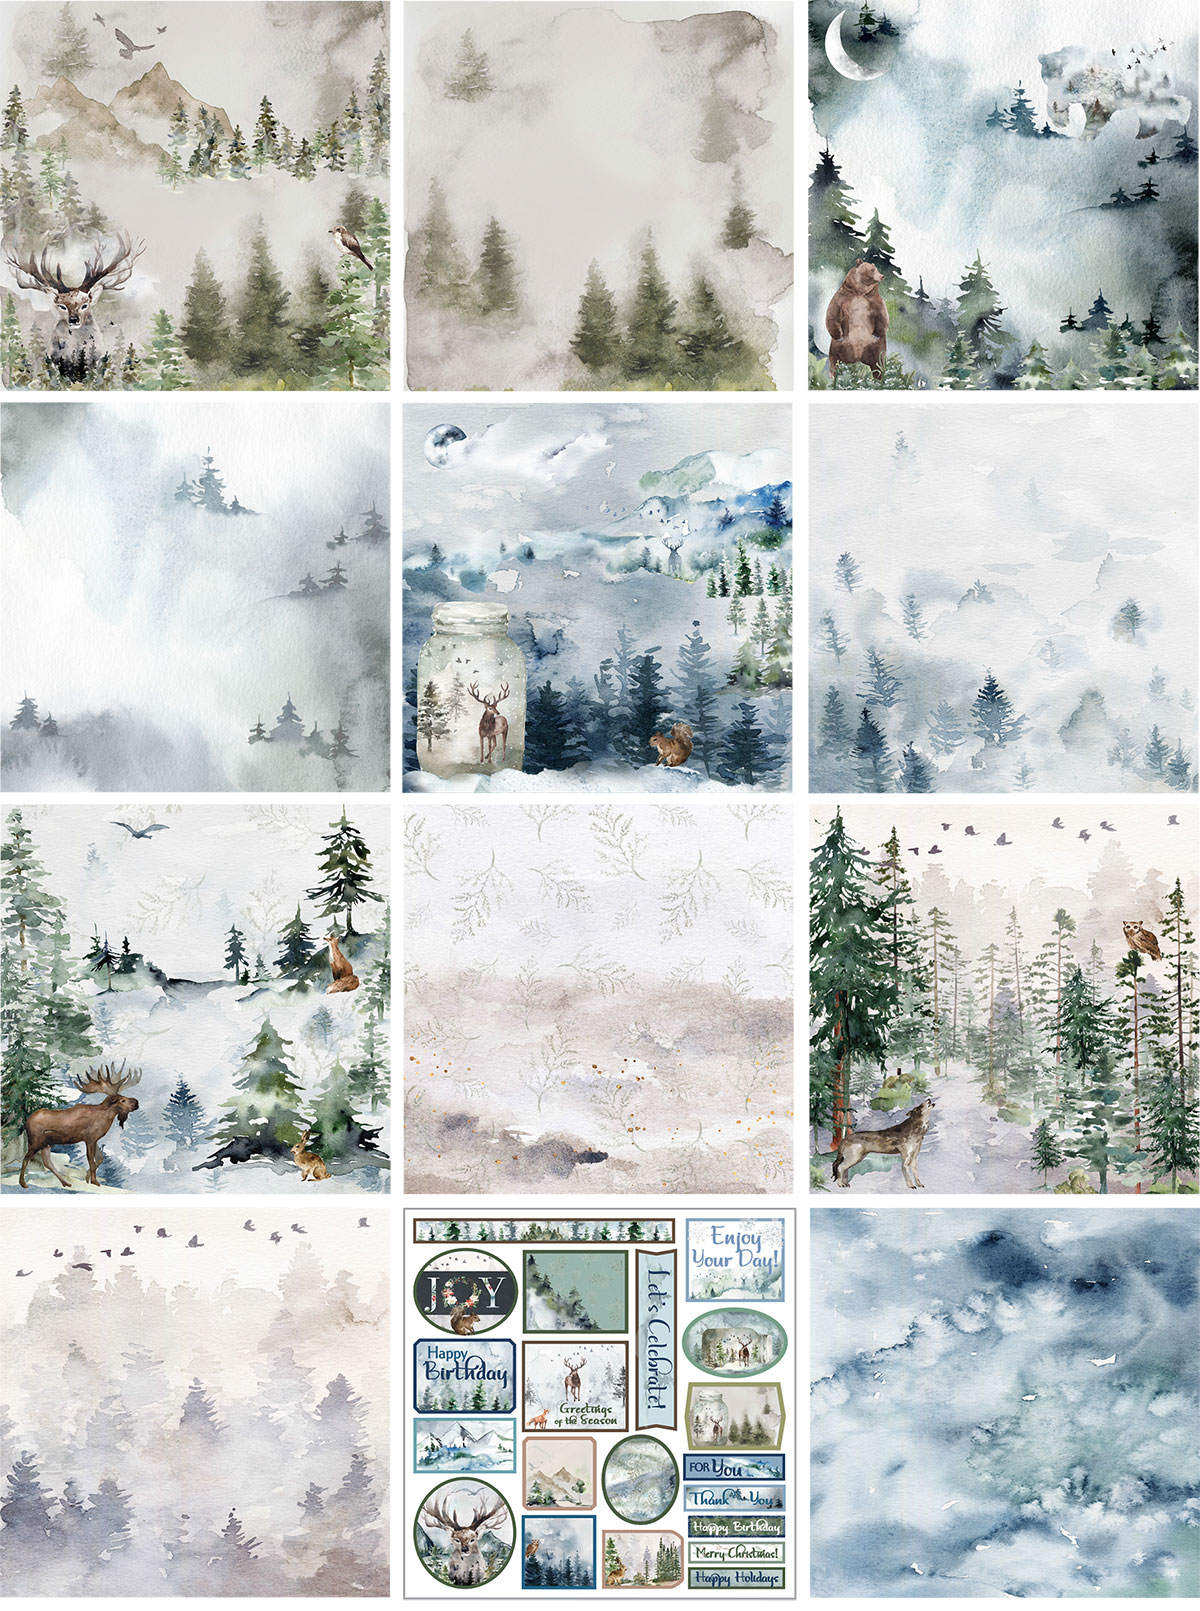 Foggy Forest 12x12 Patterned Cardstock